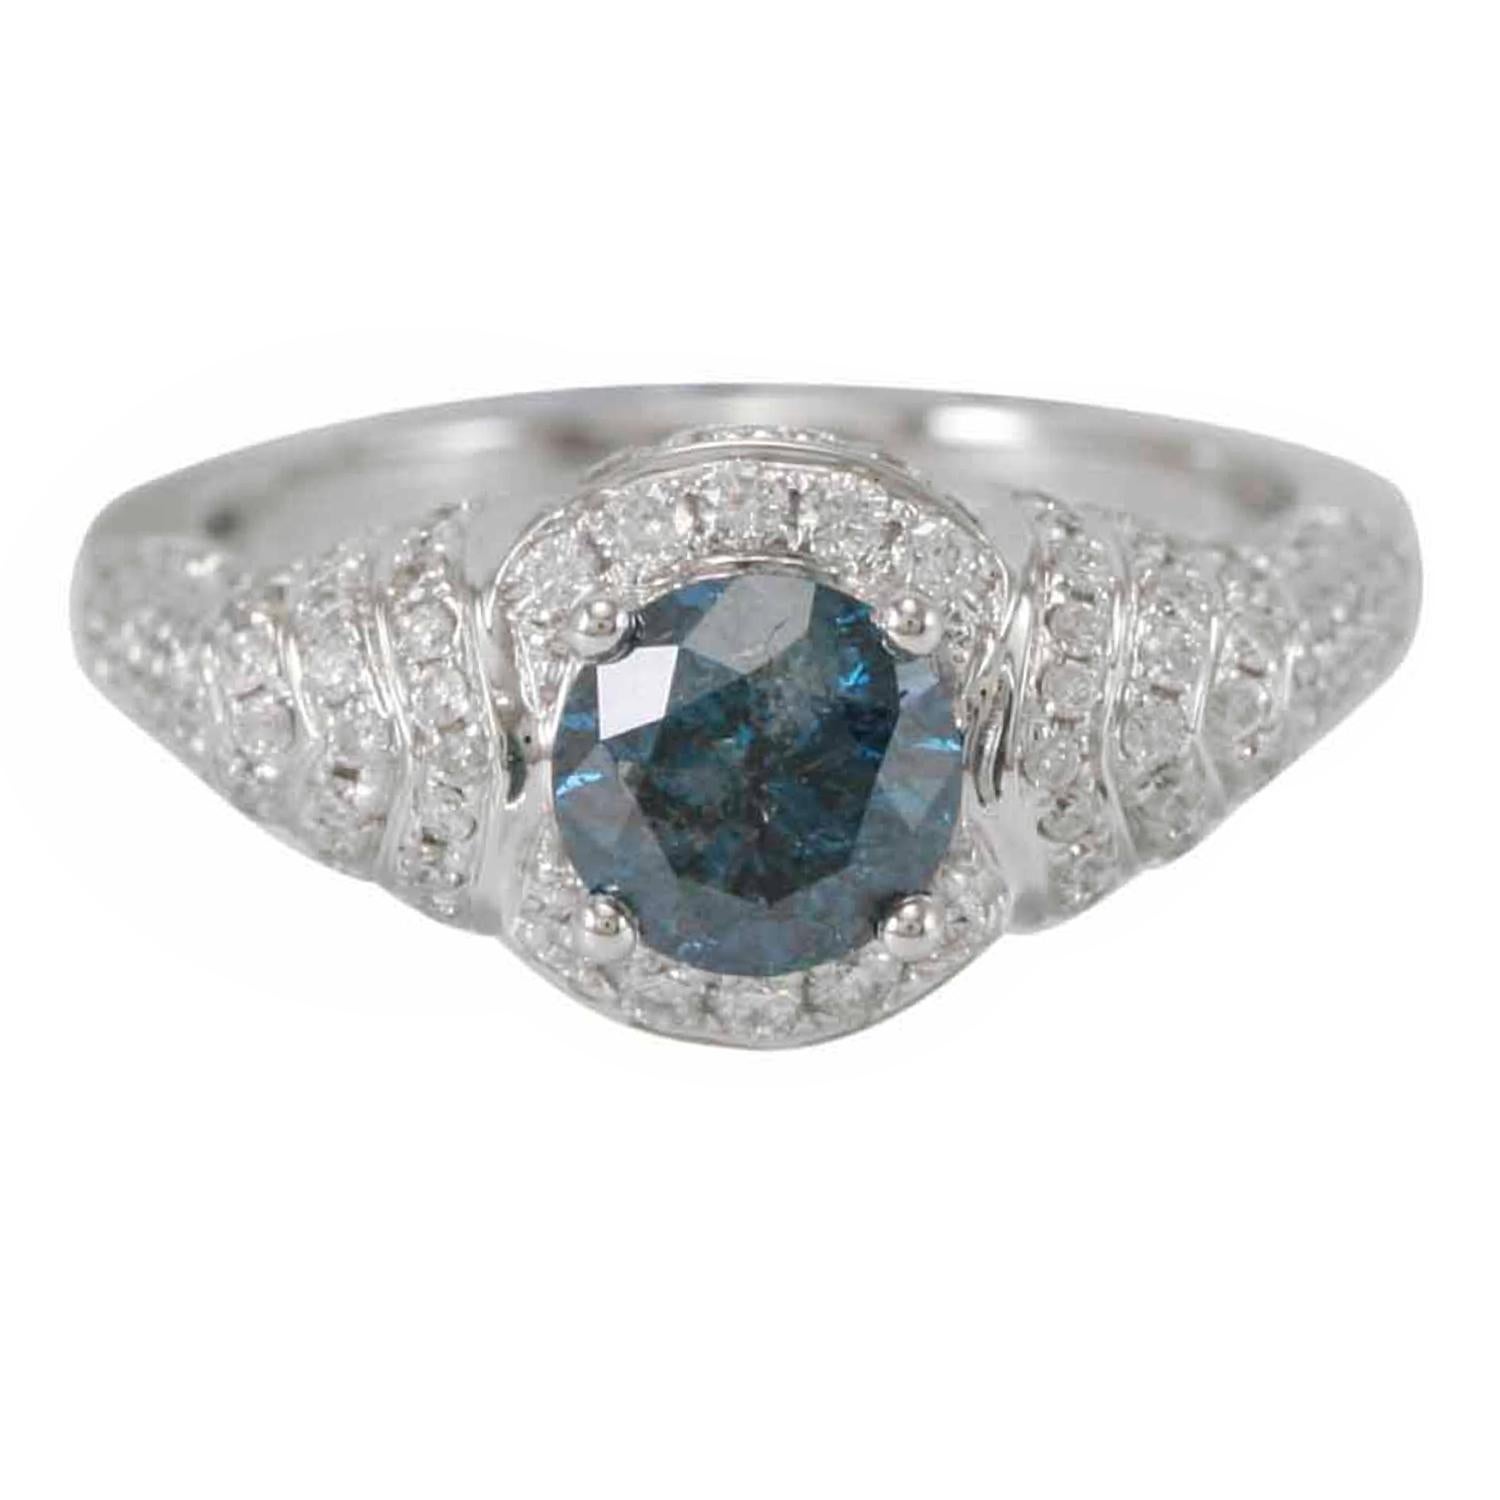 This stunning, one-of-a-kind ring from the Suzy Levian Limited Edition collection features a gorgeous round-cut, blue diamond (1.06ct) center stone with an array of white diamond (.79cttw) accents, handset in a 14k white gold setting. French